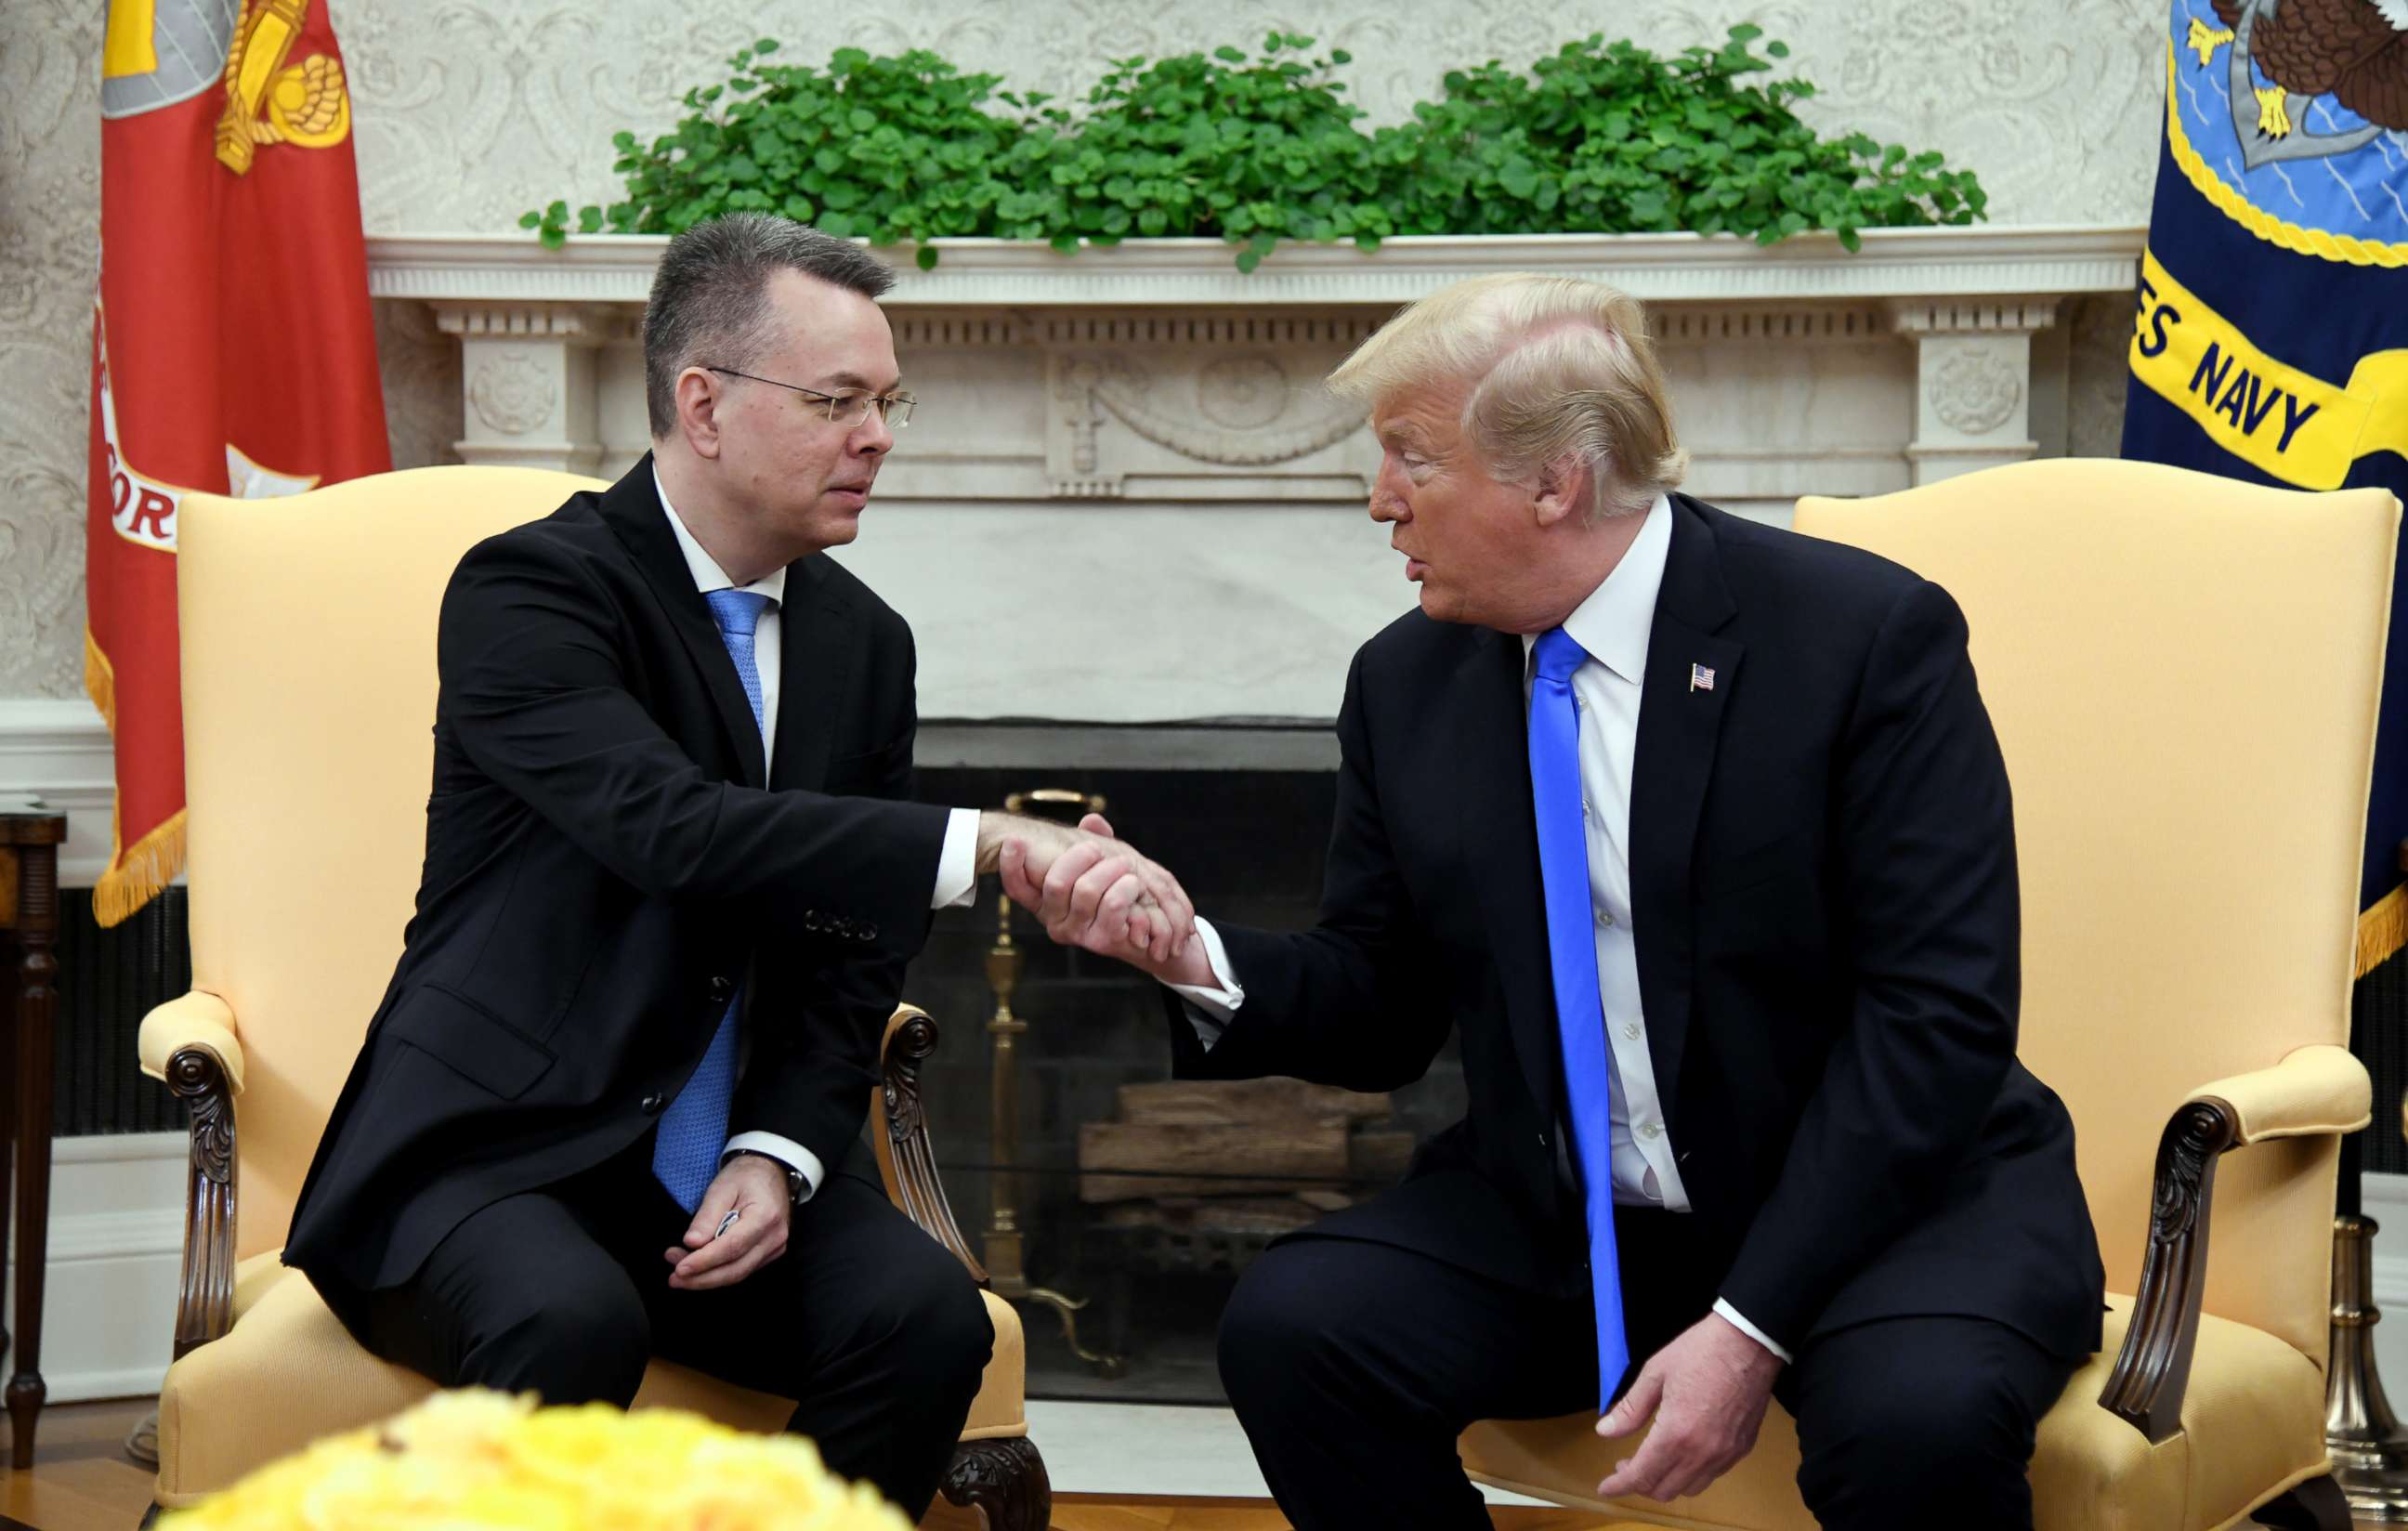 PHOTO: President Donald Trump meets with Pastor Andrew Brunson in the Oval Office of the White House on Oct. 13, 2018 in Washington.